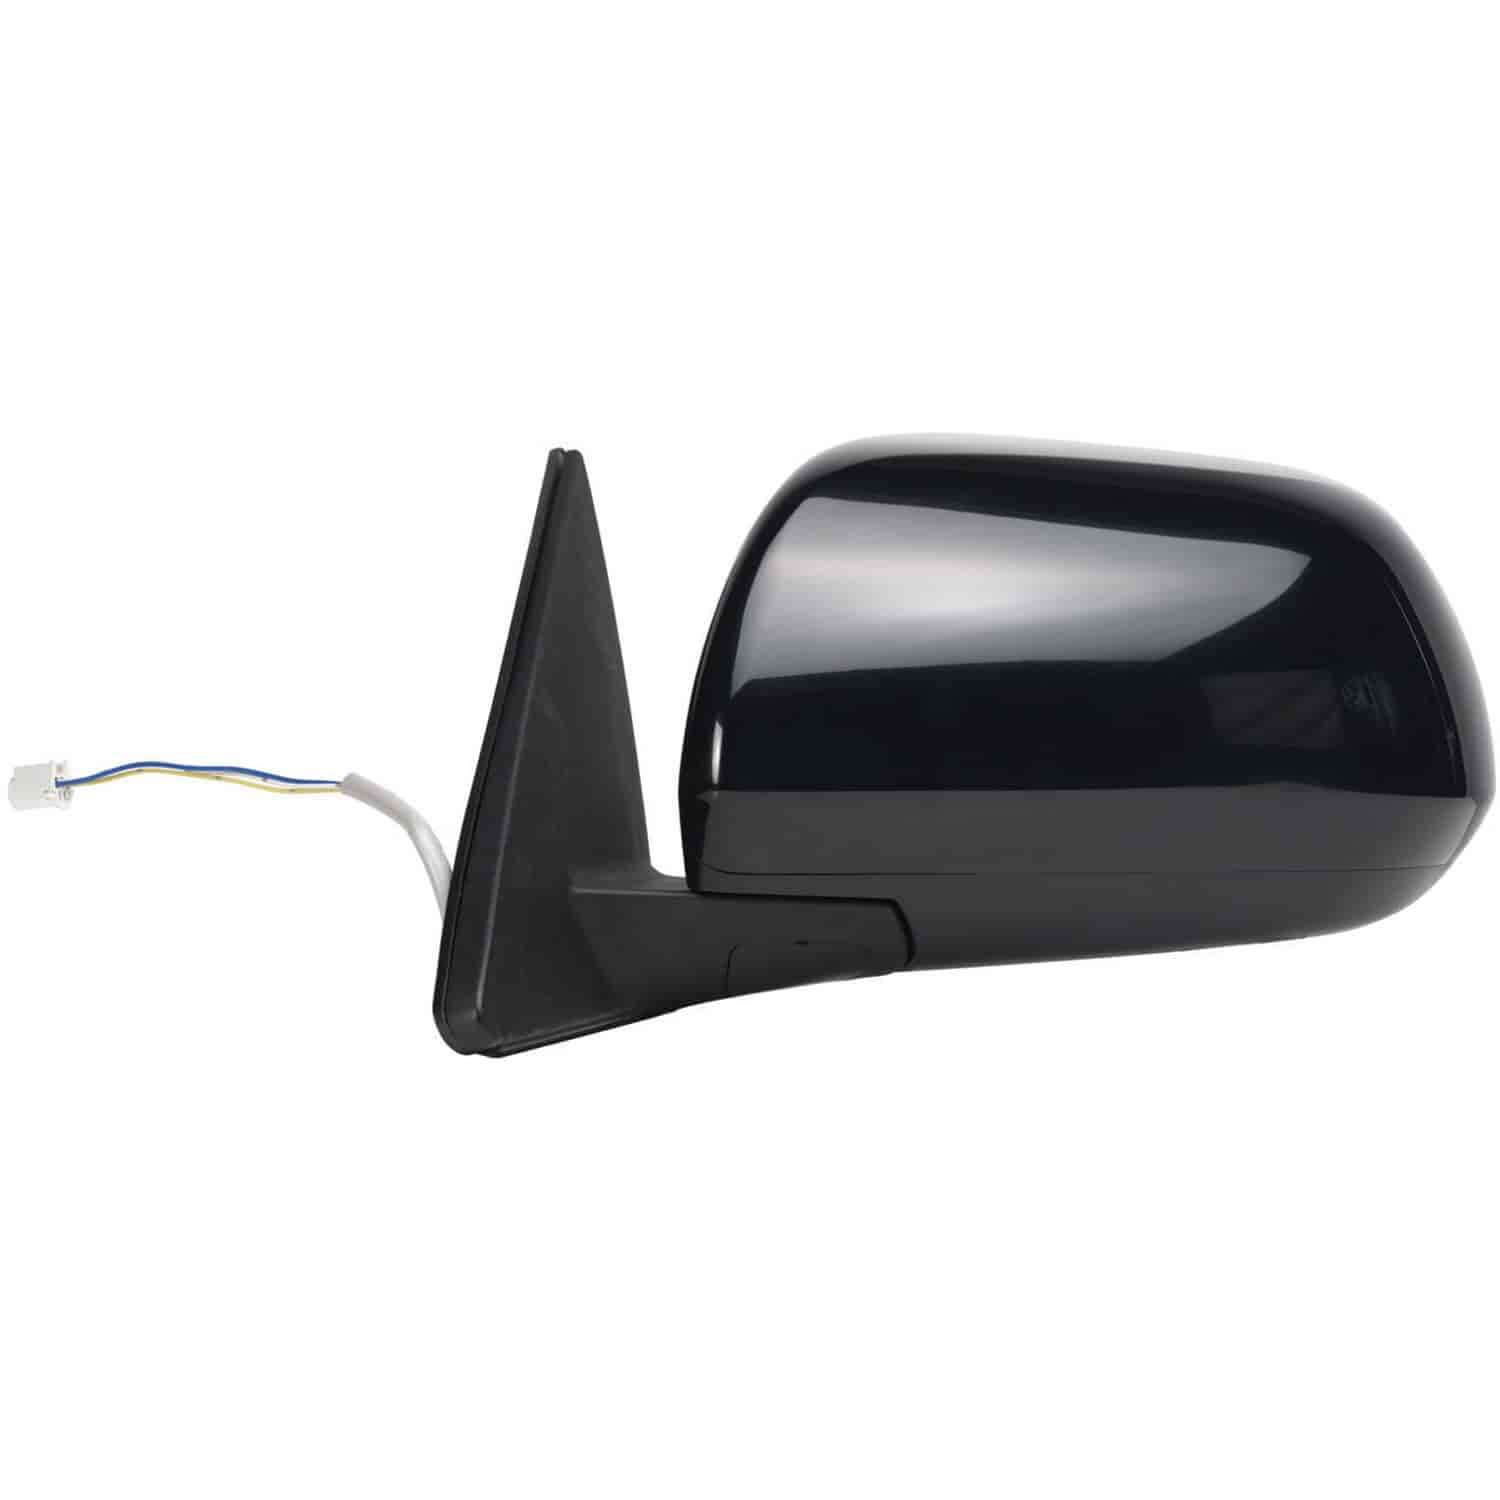 OEM Style Replacement mirror for 08-13 Toyota Highlander Base Hybrid L Model driver side mirror test